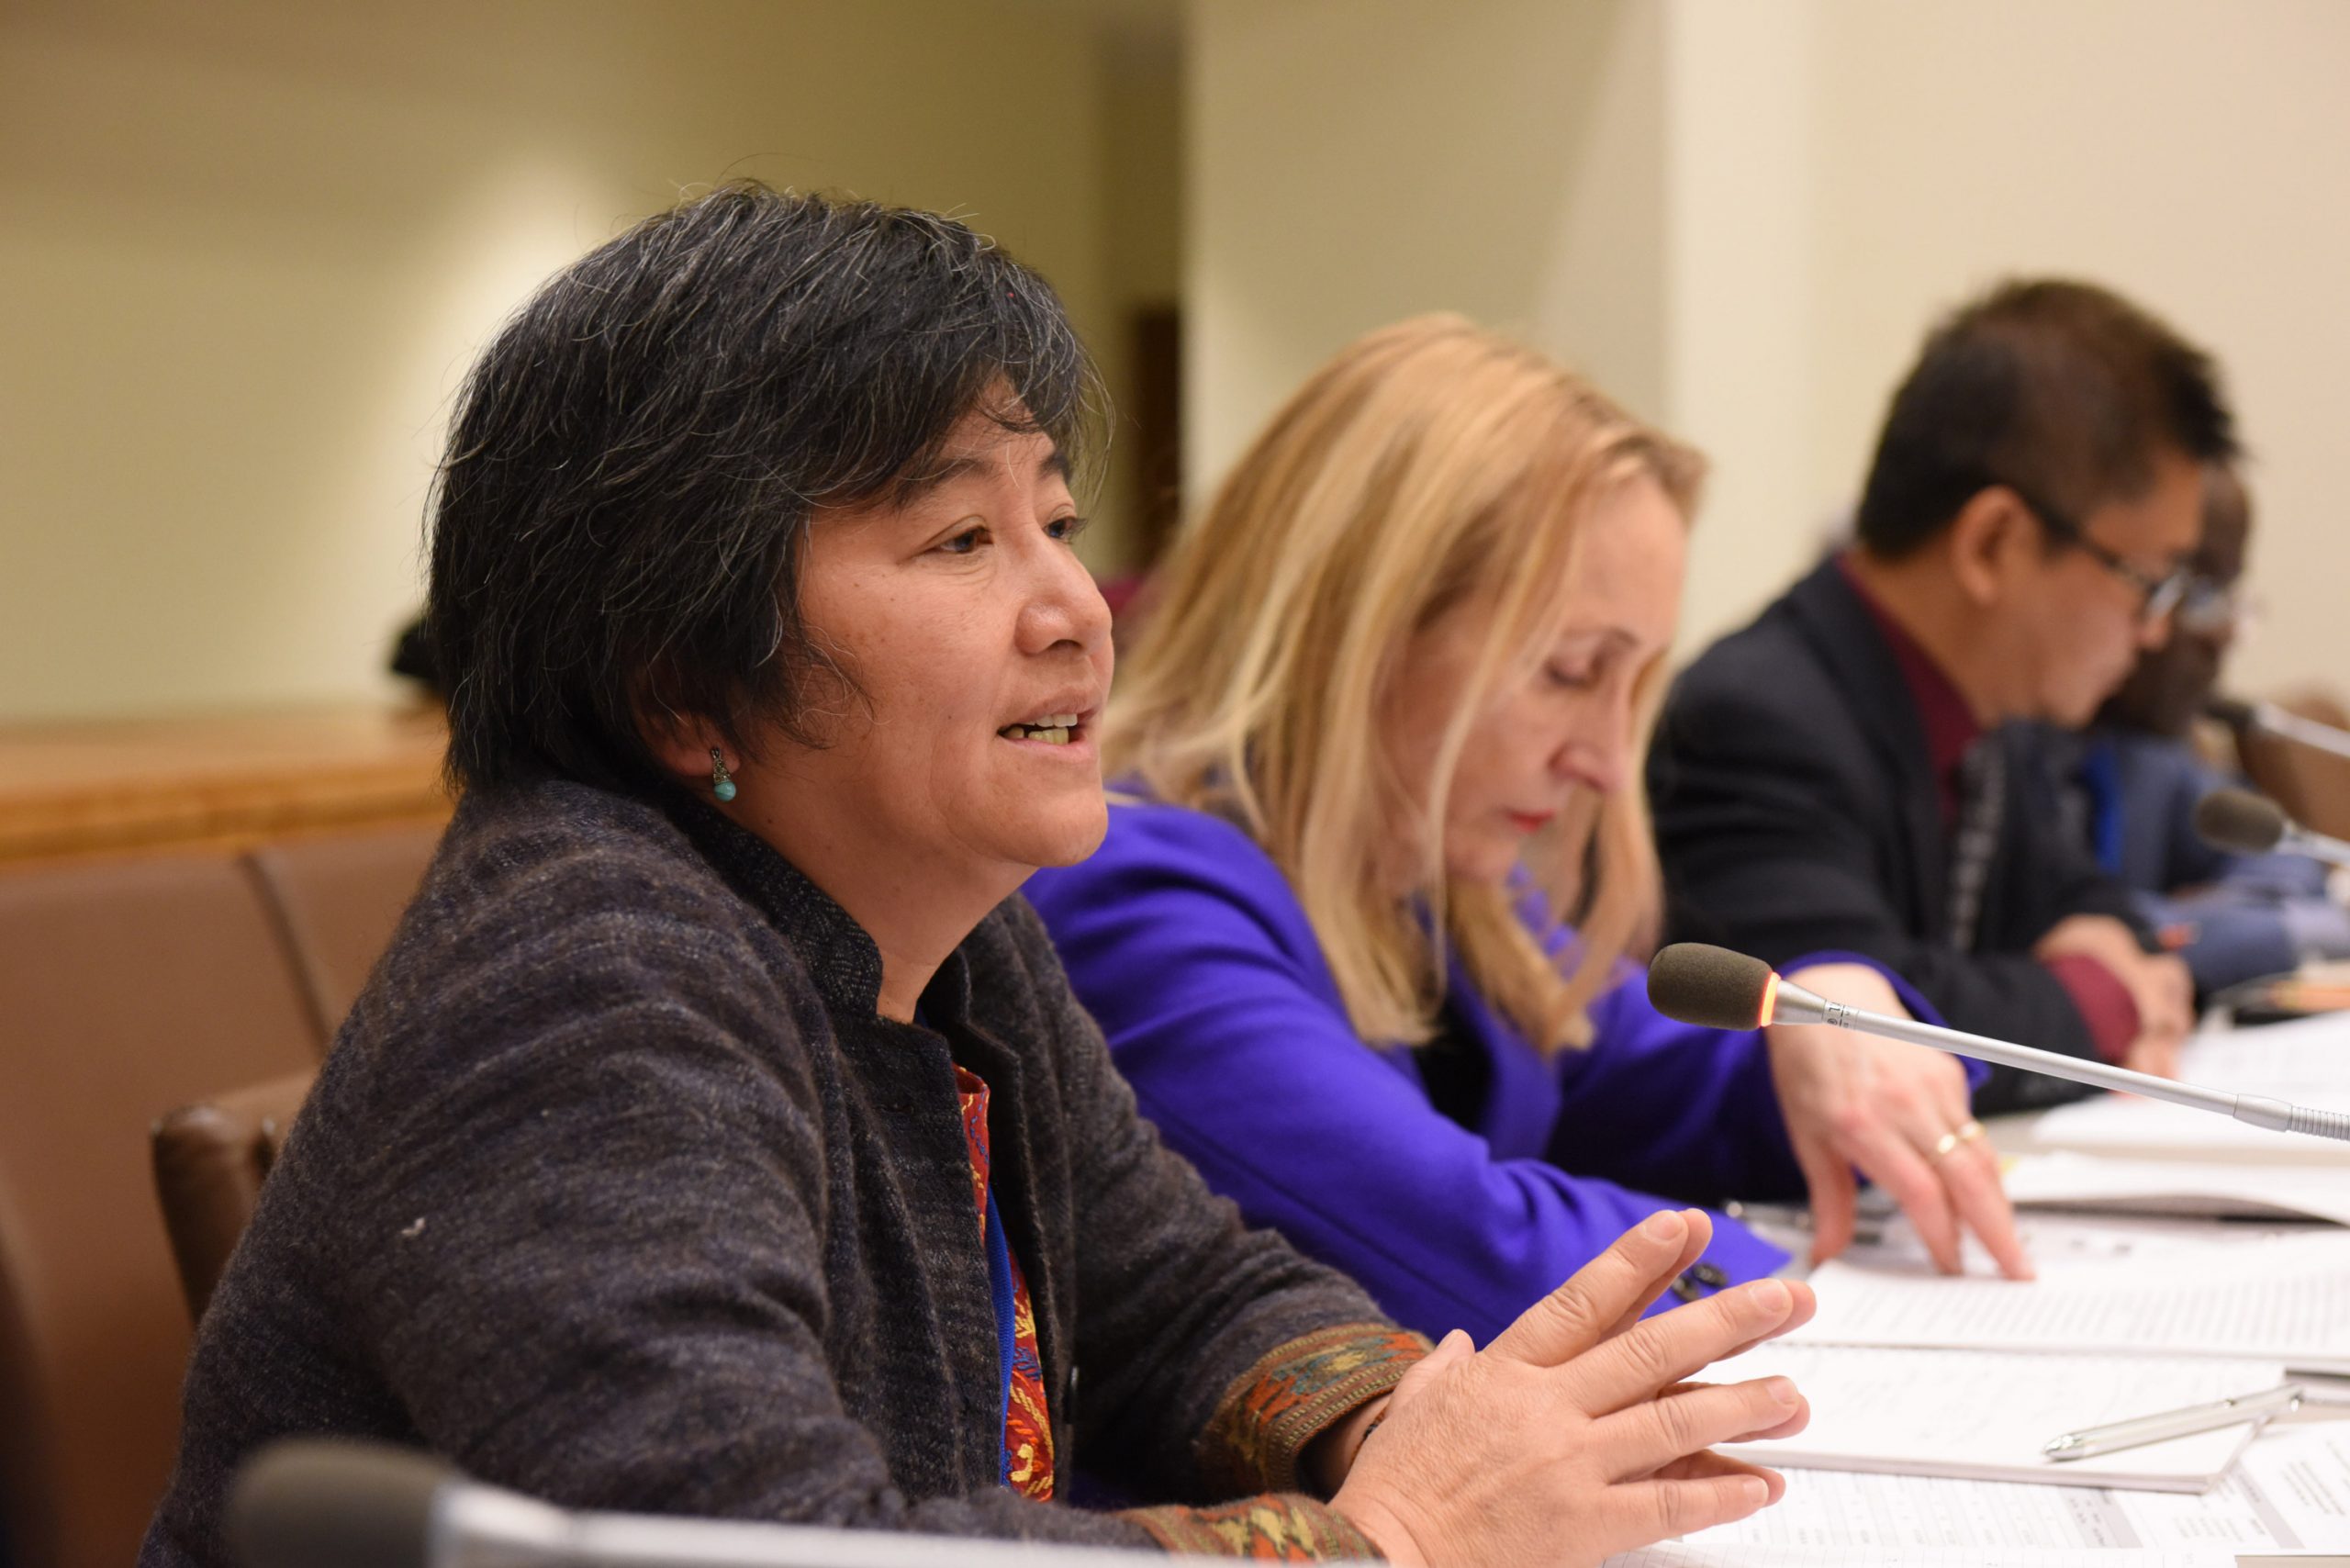 Joan Carling from the Indigenous Peoples’ Major Group for Sustainable Development speaks at an event on gender and the SGDs. Credit: UN Women.